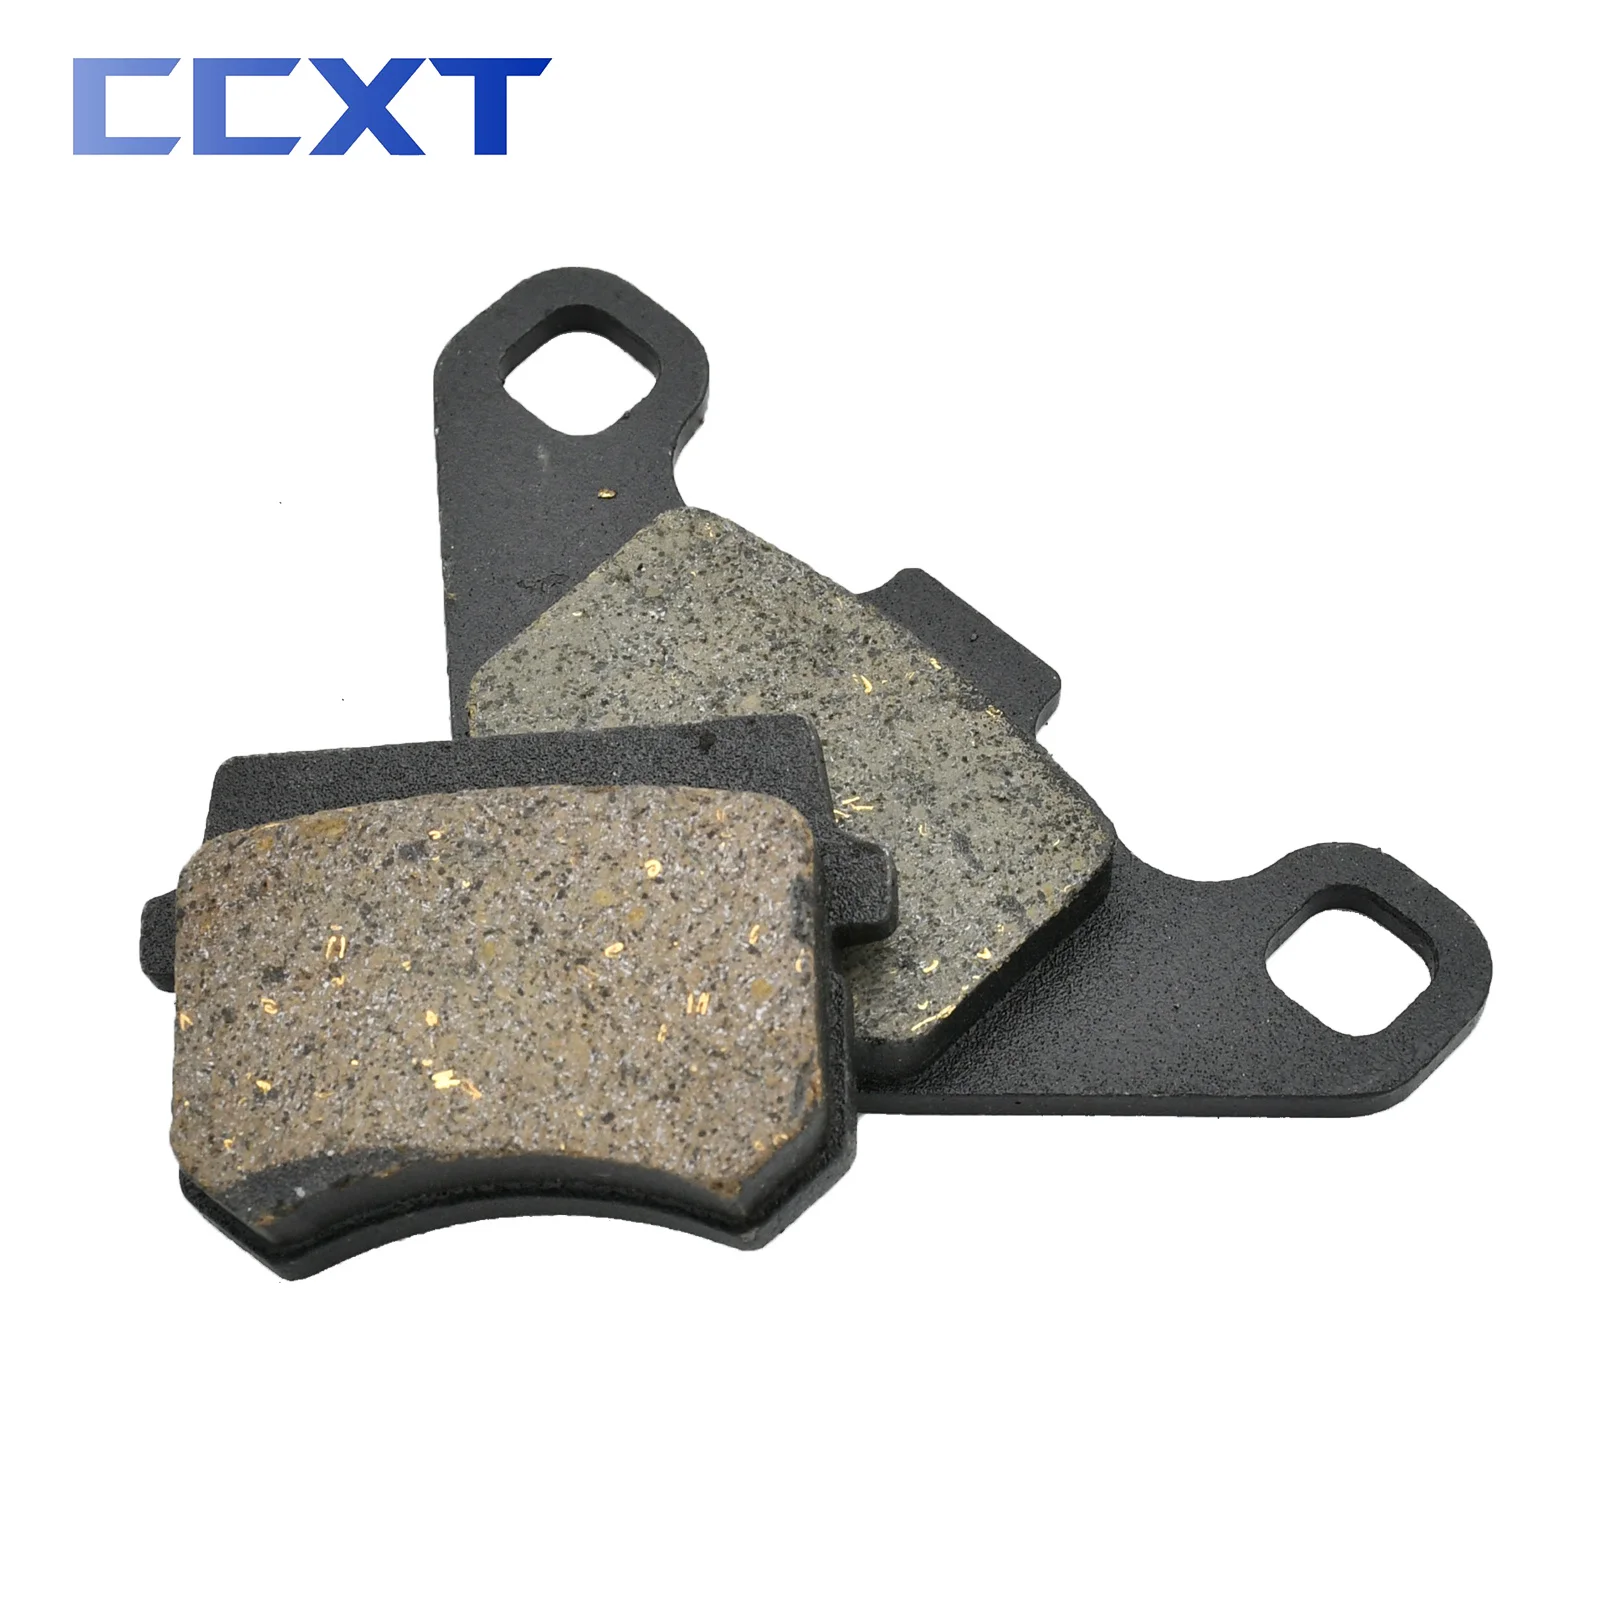 

Motorcycle Scooter Front & Rear Brake Pads For ATV 50cc 70cc 90cc 110cc 125cc 150cc 200cc 250cc Pit Bike ATV Go Kart Dirt Bike